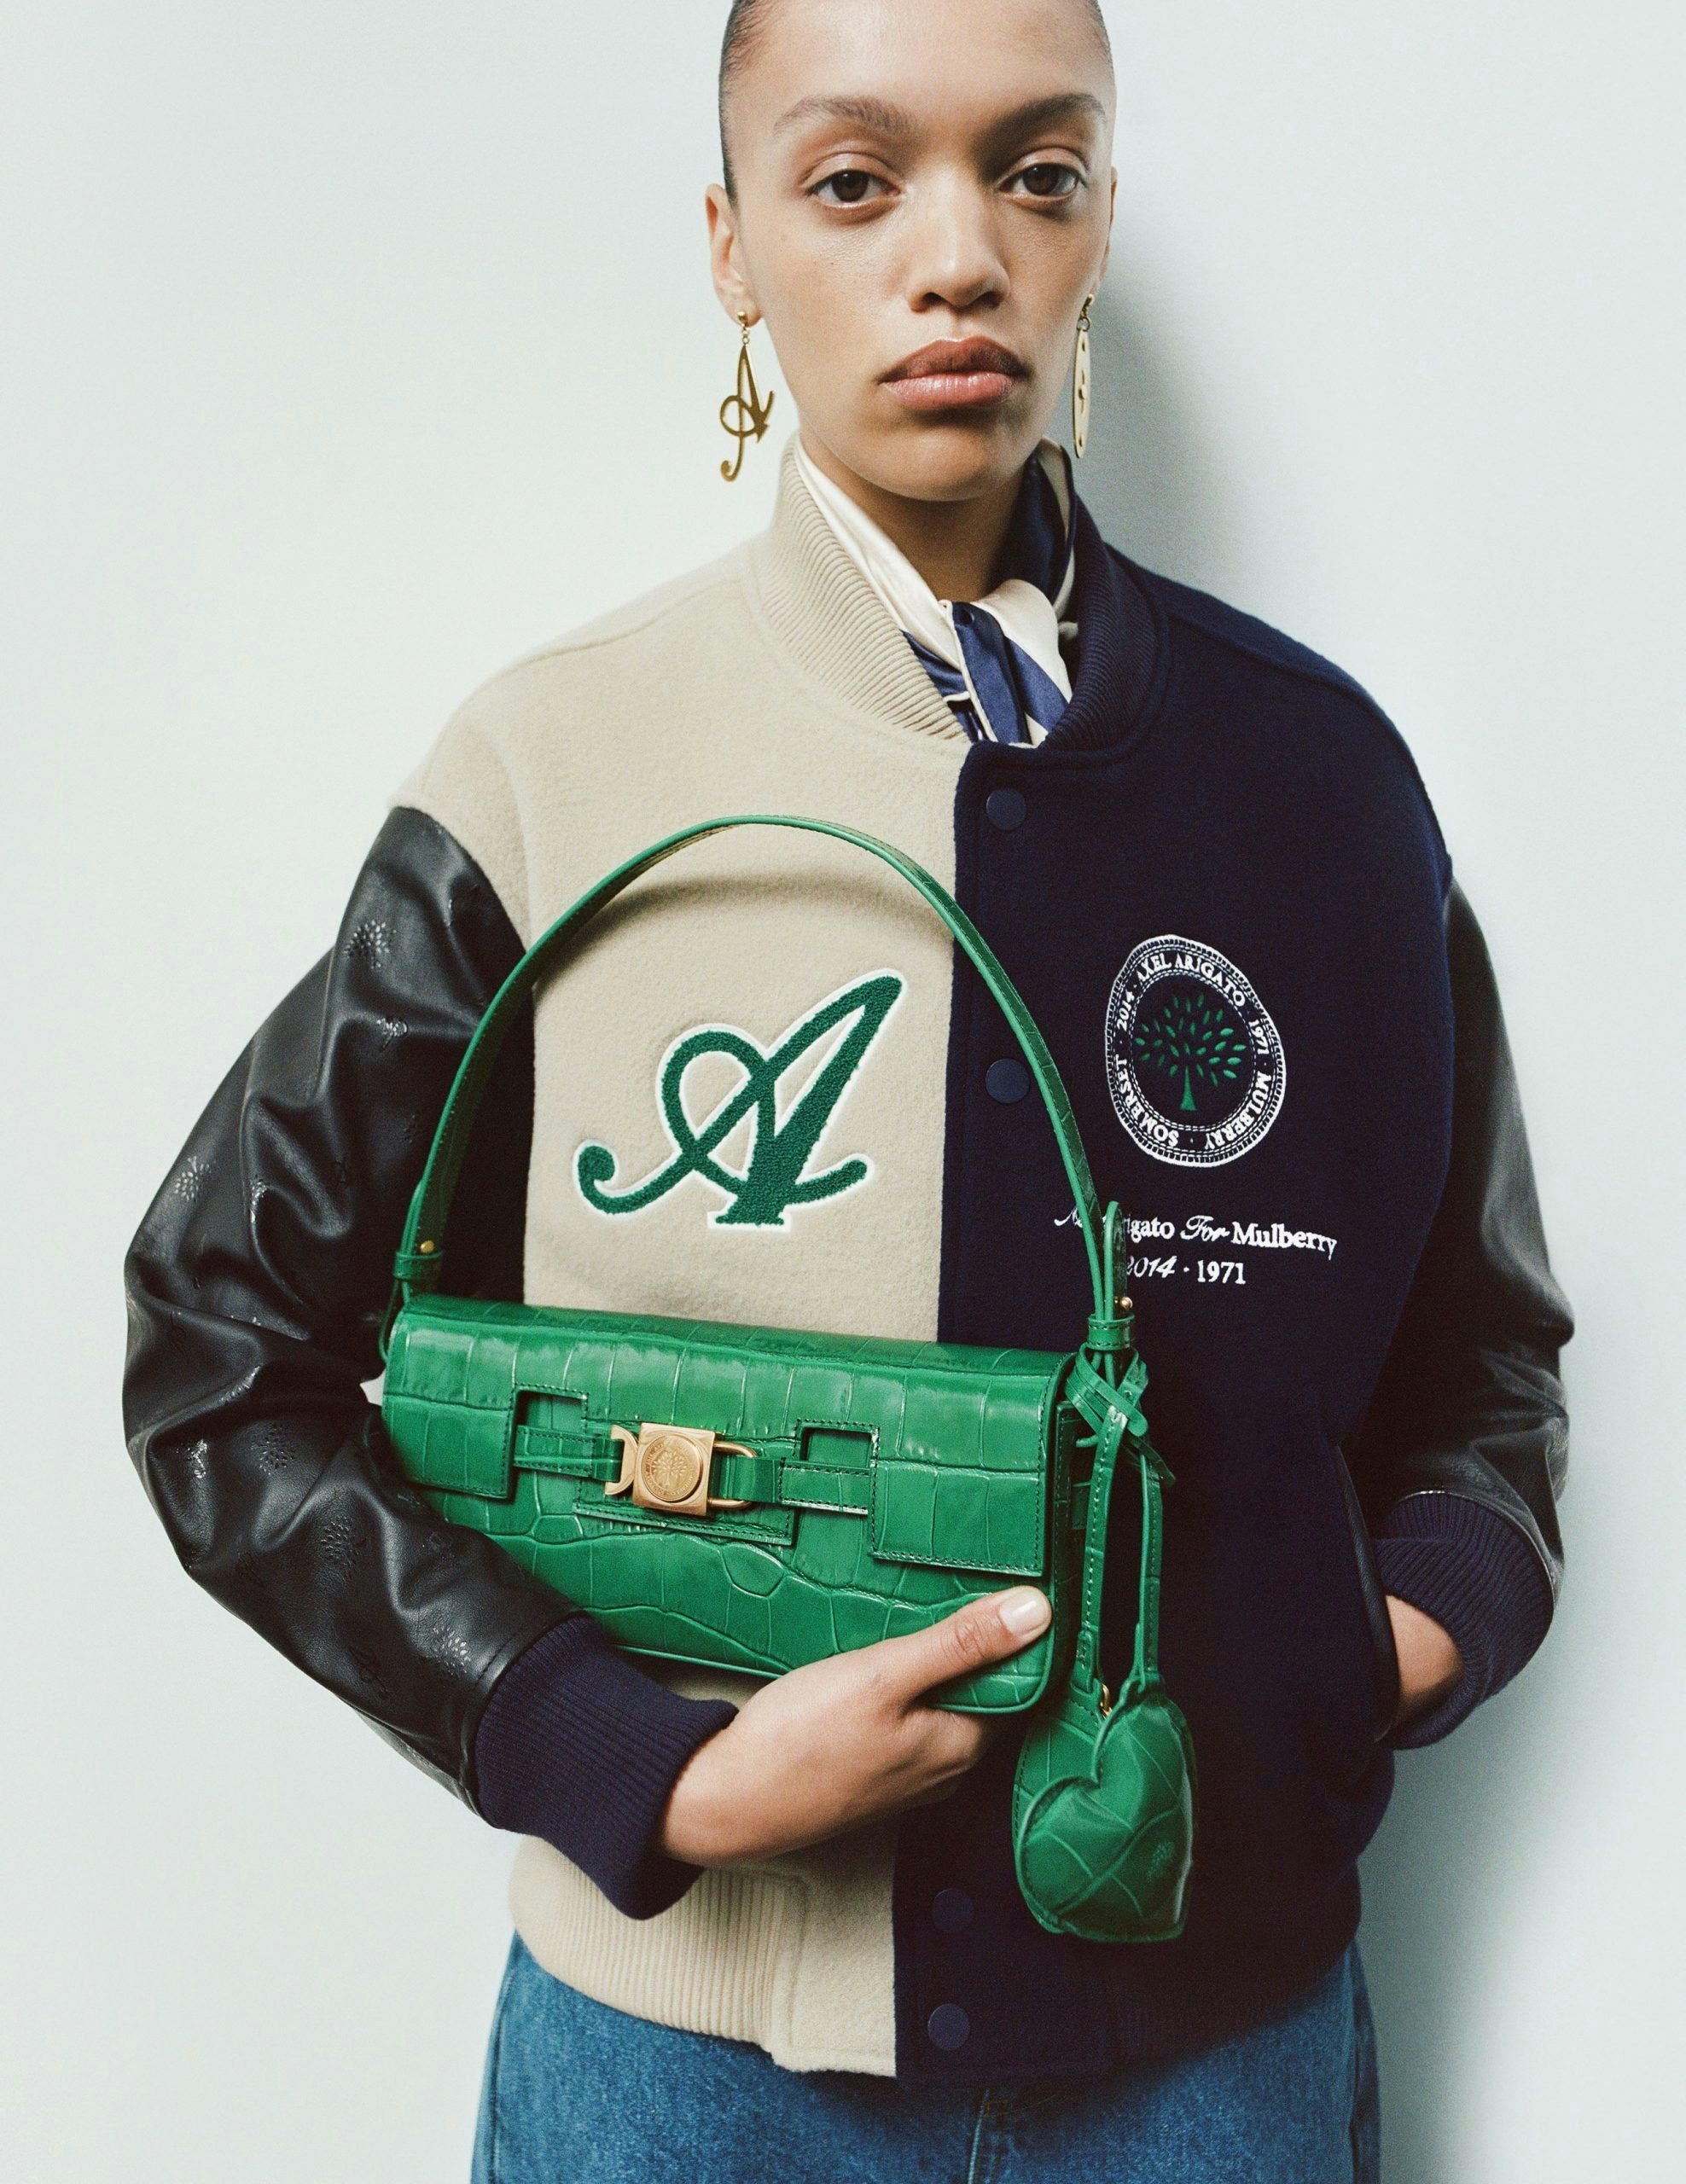 From XL Mulberry favorites, to varsity jackets, Axel Arigato x Mulberry has won fans of both brands over. Photo: Axel Arigato